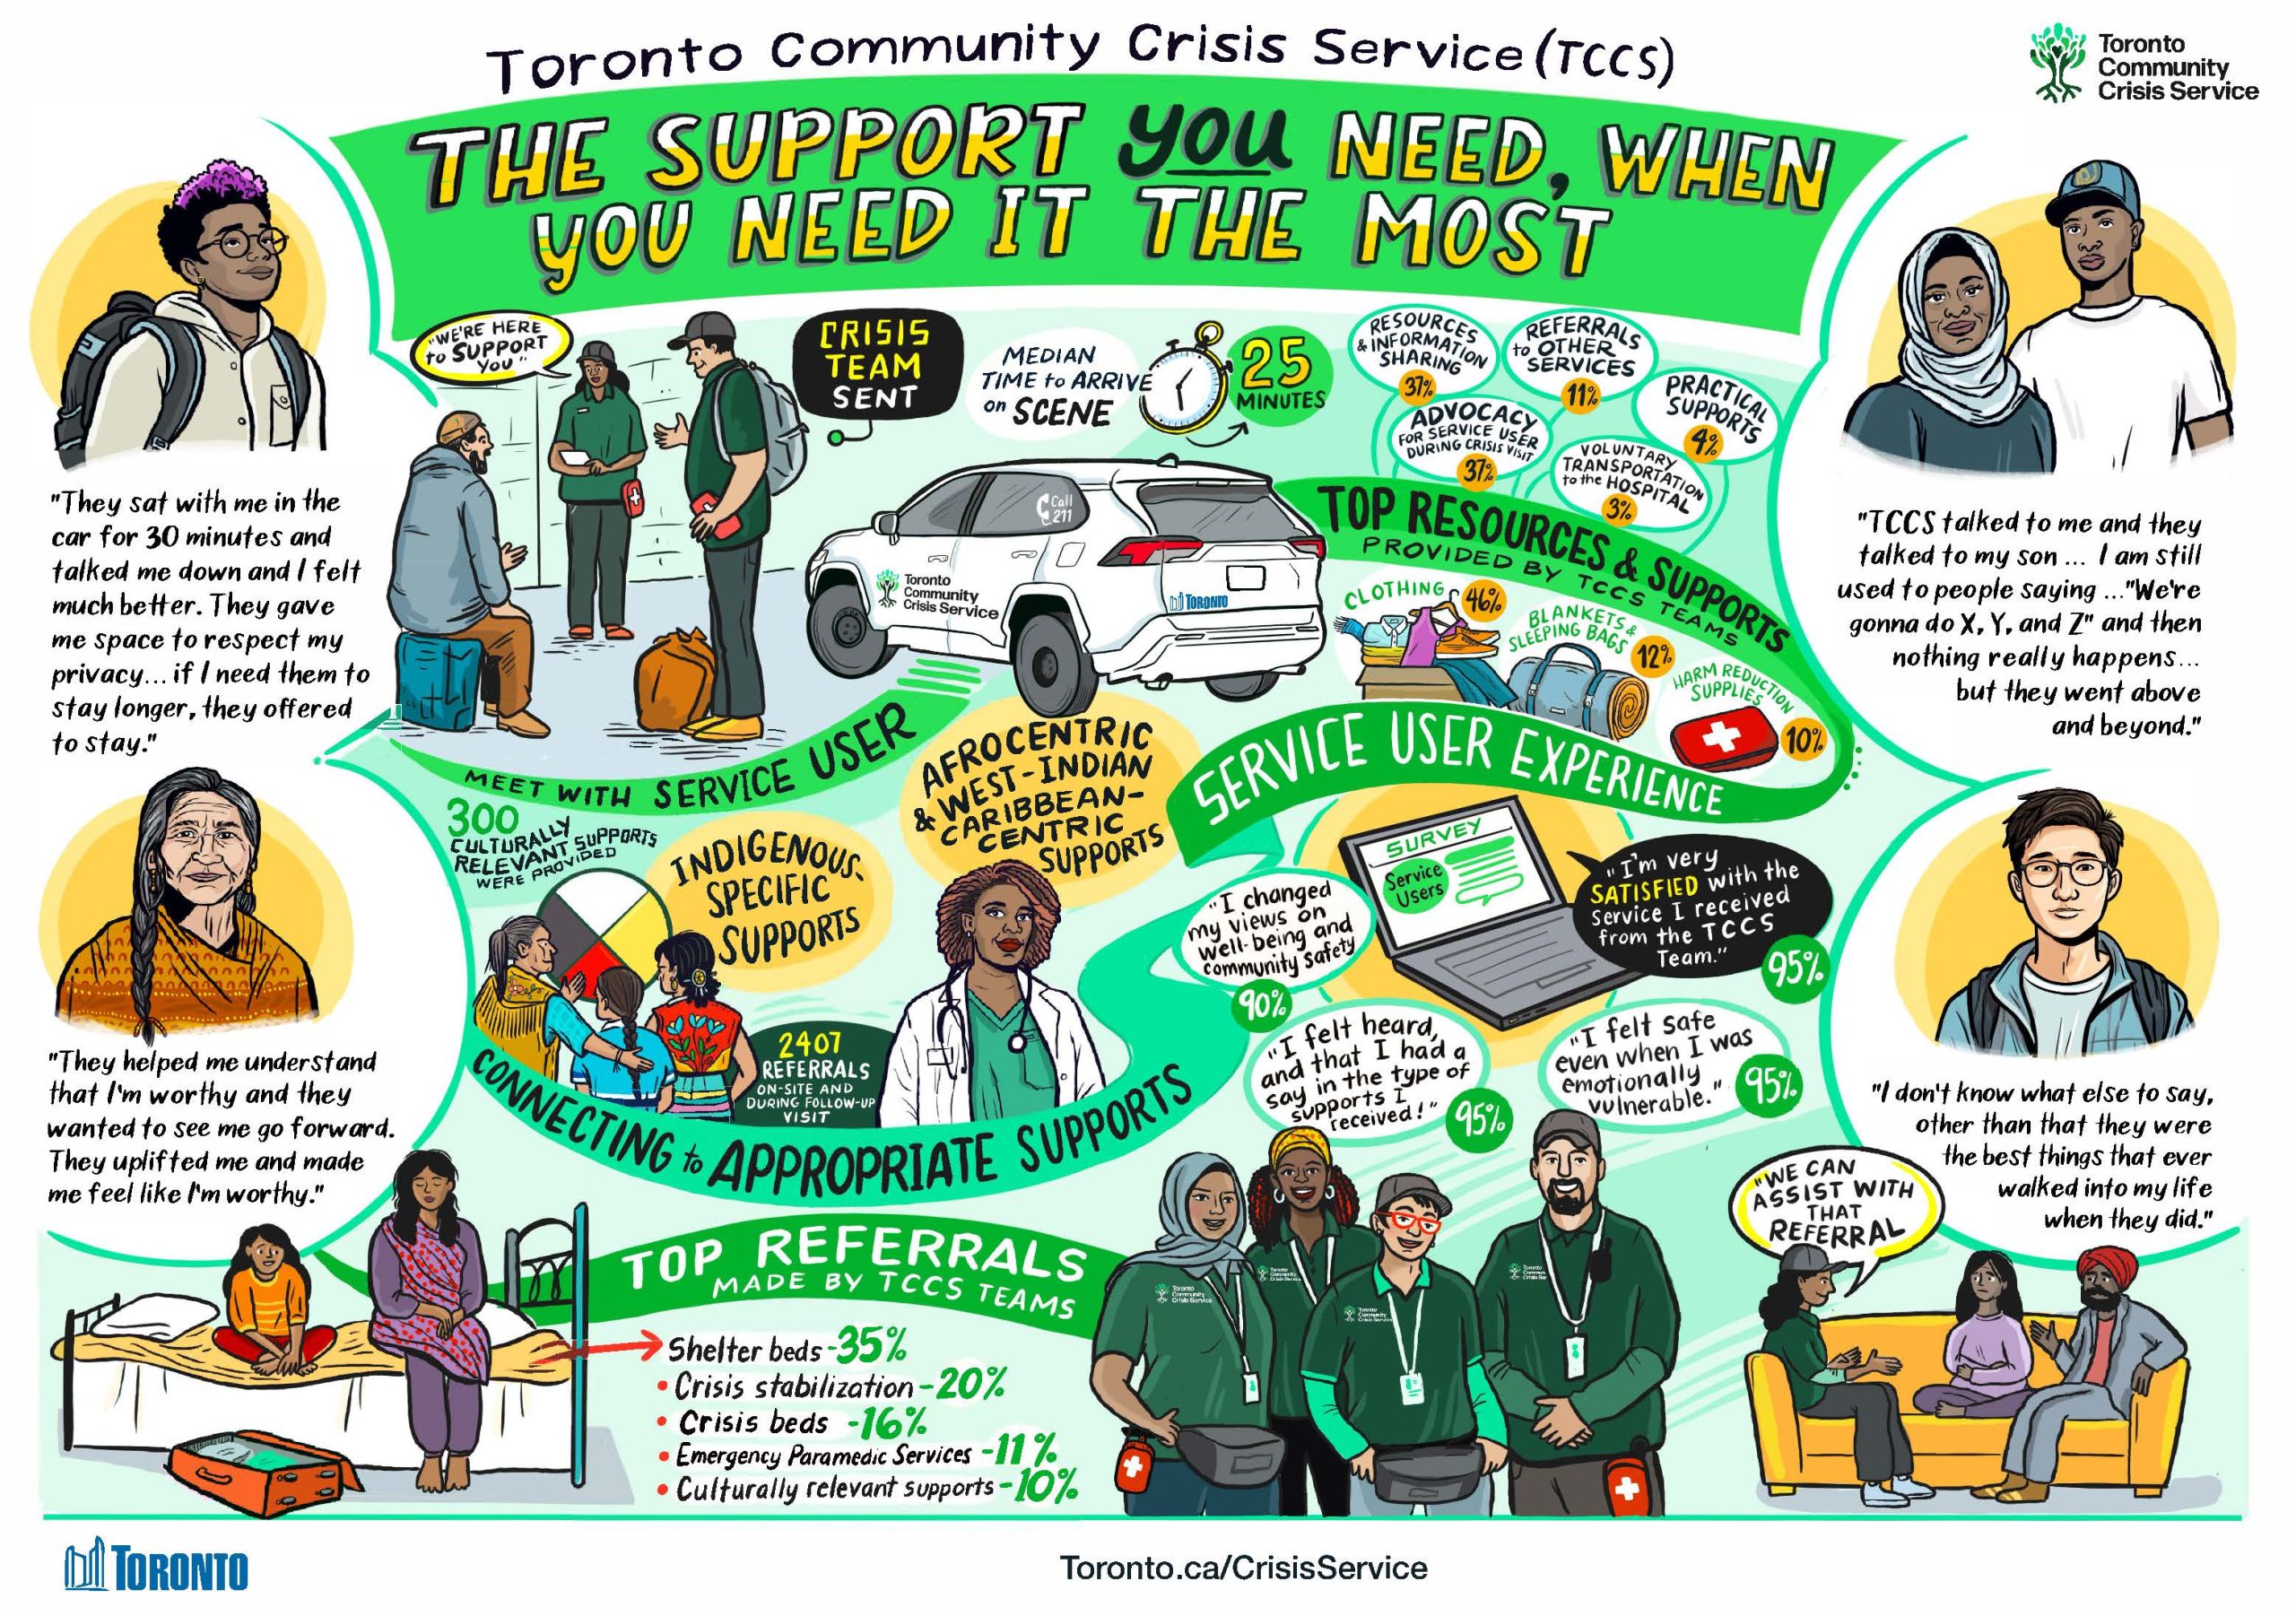 The Toronto Community Crisis Service (TCCS) is a community-based service of trained teams of crisis workers who respond to people experiencing a mental health crisis. It is non-police led response to mental health crisis calls and well-being checks that is client centred, trauma-informed and focuses on harm reduction. This image is a visual map showcasing TCCS service user experiences, testimonials and statistics. Service users are connected with appropriate supports, including Indigenous-specific and Afrocentric and West Indian Carribbean-centric supports; 300 culturally relevant supports and 2407 referrals were provided. The top referrals made by TCCS teams were shelter beds (35%); crisis stabilization (20%); crisis beds (16%); emergency paramedic services (11%) and culturally relevant supports (10%). The top resources and supports provided by the TCCS teams included clothing (46%); blankets and sleeping bags (12%) and harm reduction supplies (10%). Service users experiences included 95% feeling very satisfied with the service from the TCCS; 90% changed their views on well-being and community safety; 95% felt heard and that they had a say in the type of supports they received; and 95% felt safe when they were emotionally vulnerable. Visit Toronto.ca/CrisisService to learn more.